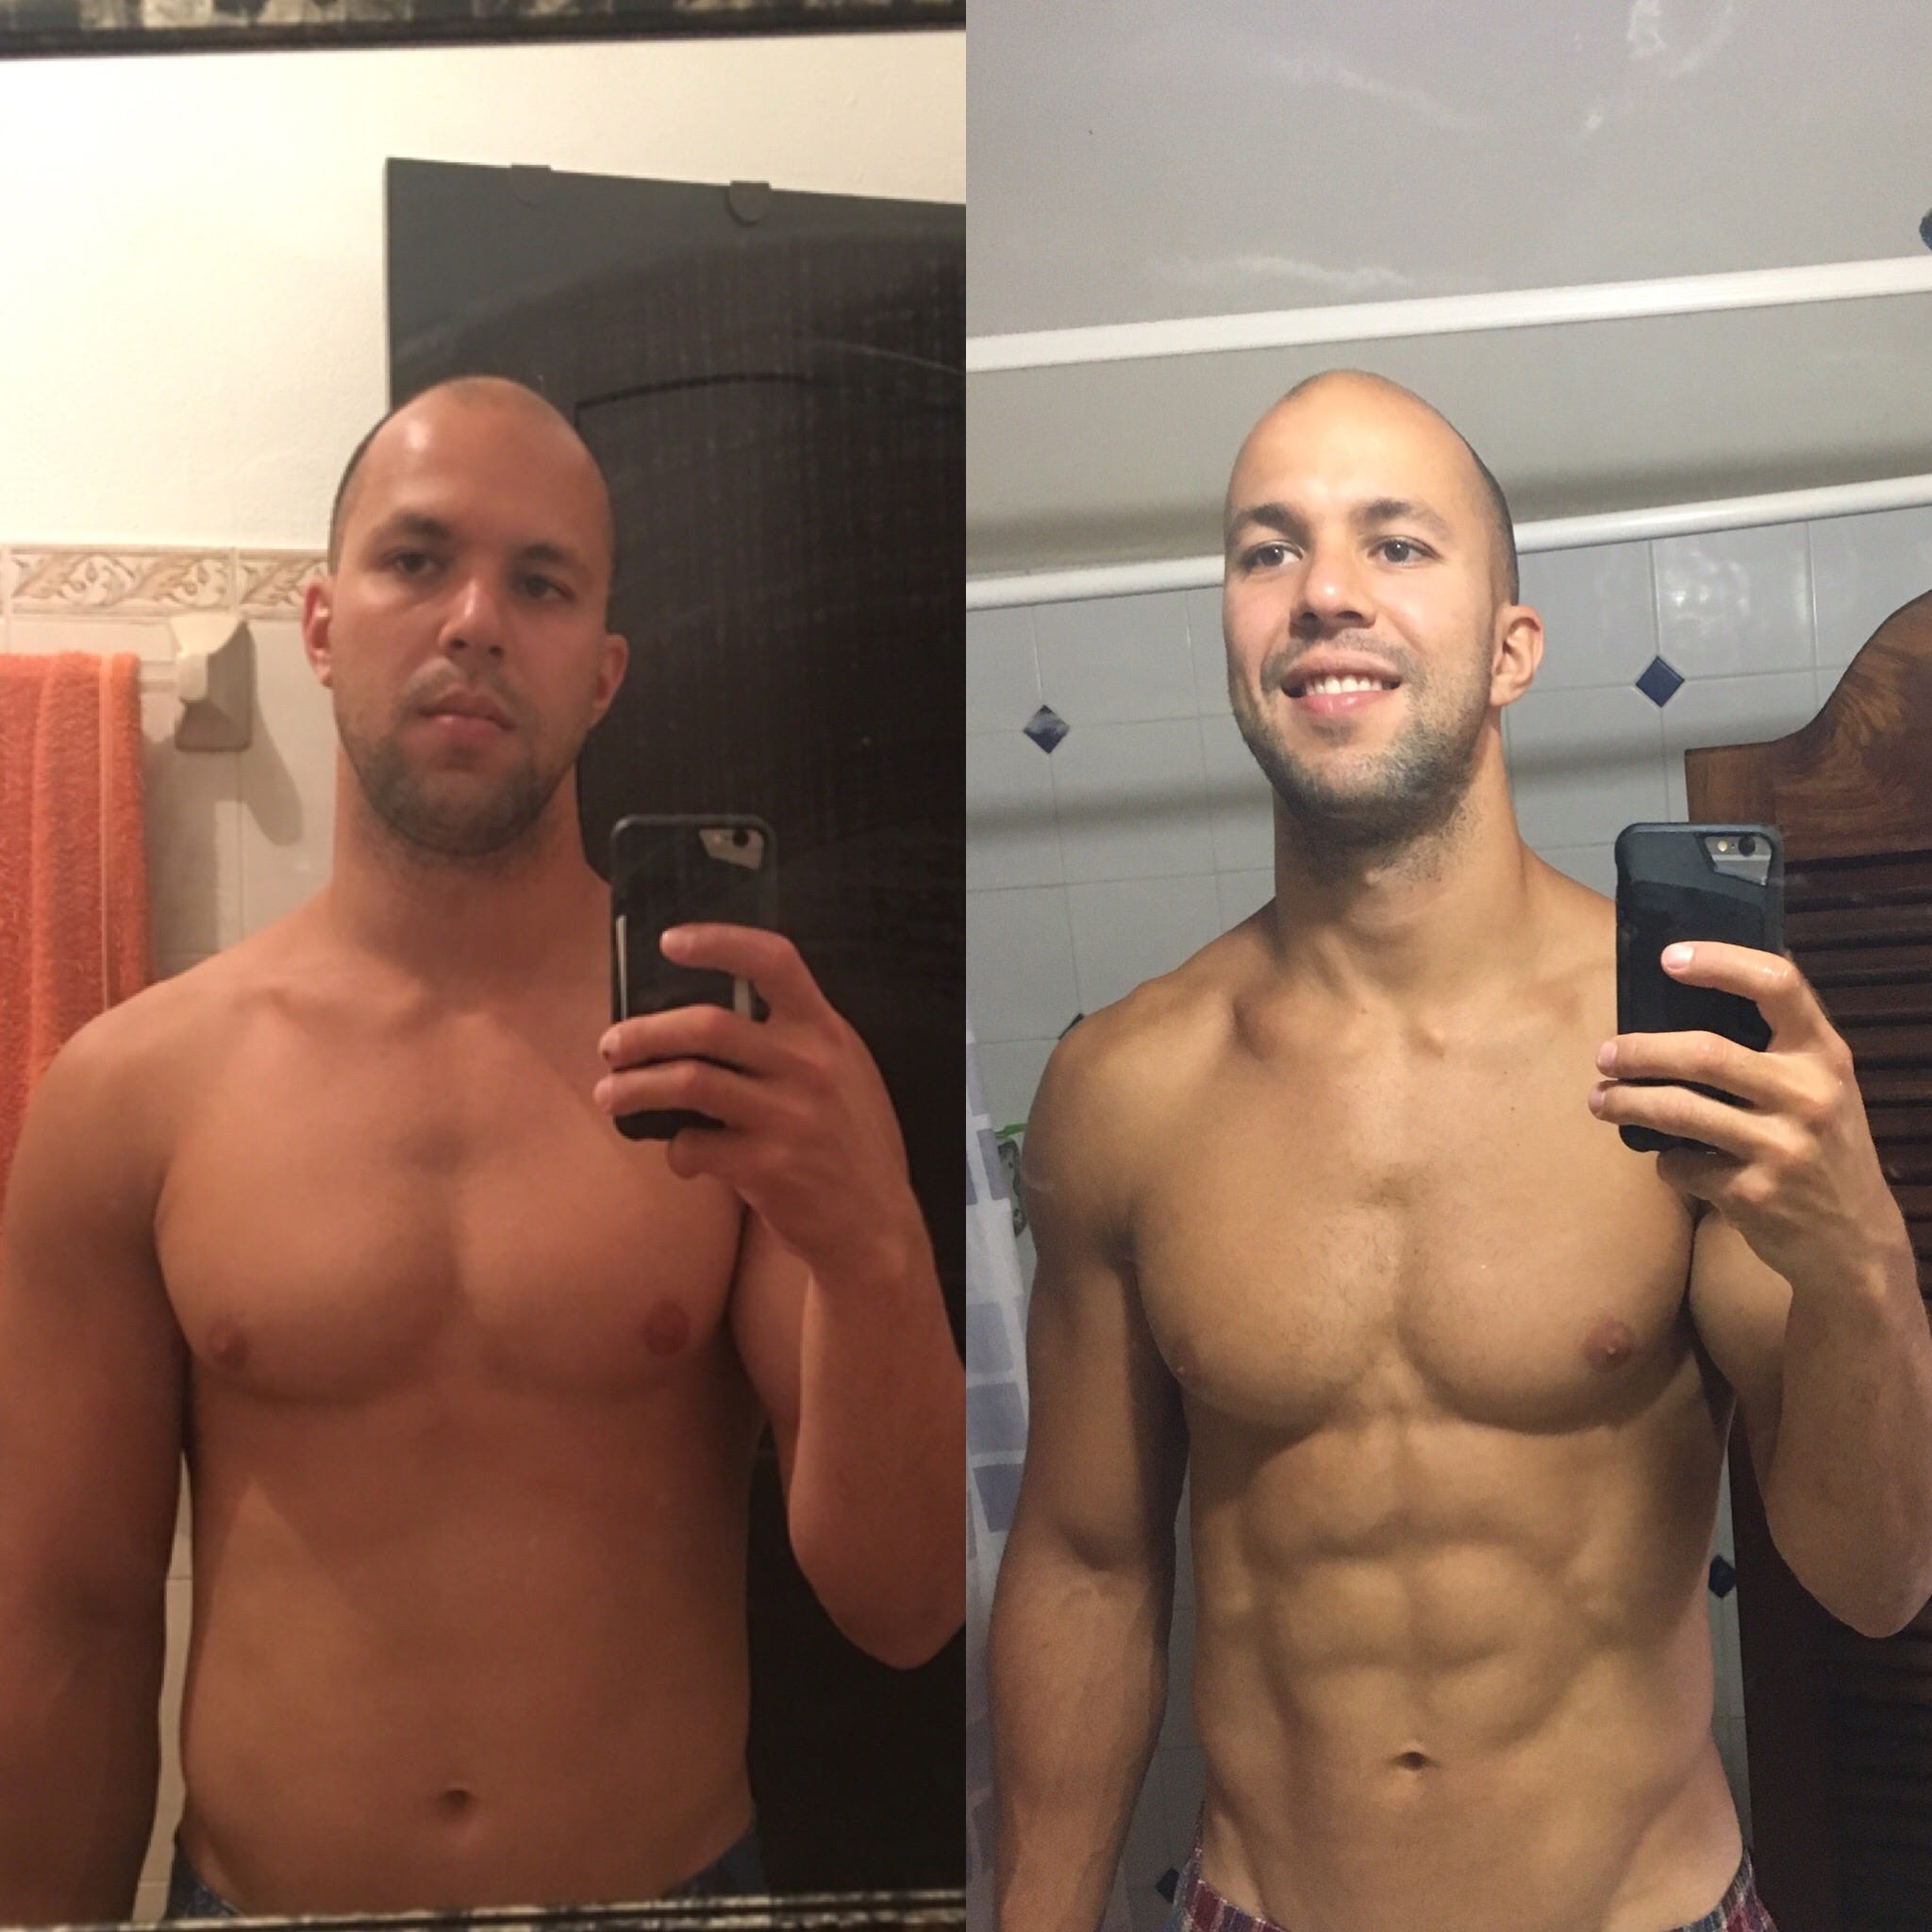 How I Gained 13 lbs Of Muscle in 7 Months, And How You Can Do It Too.